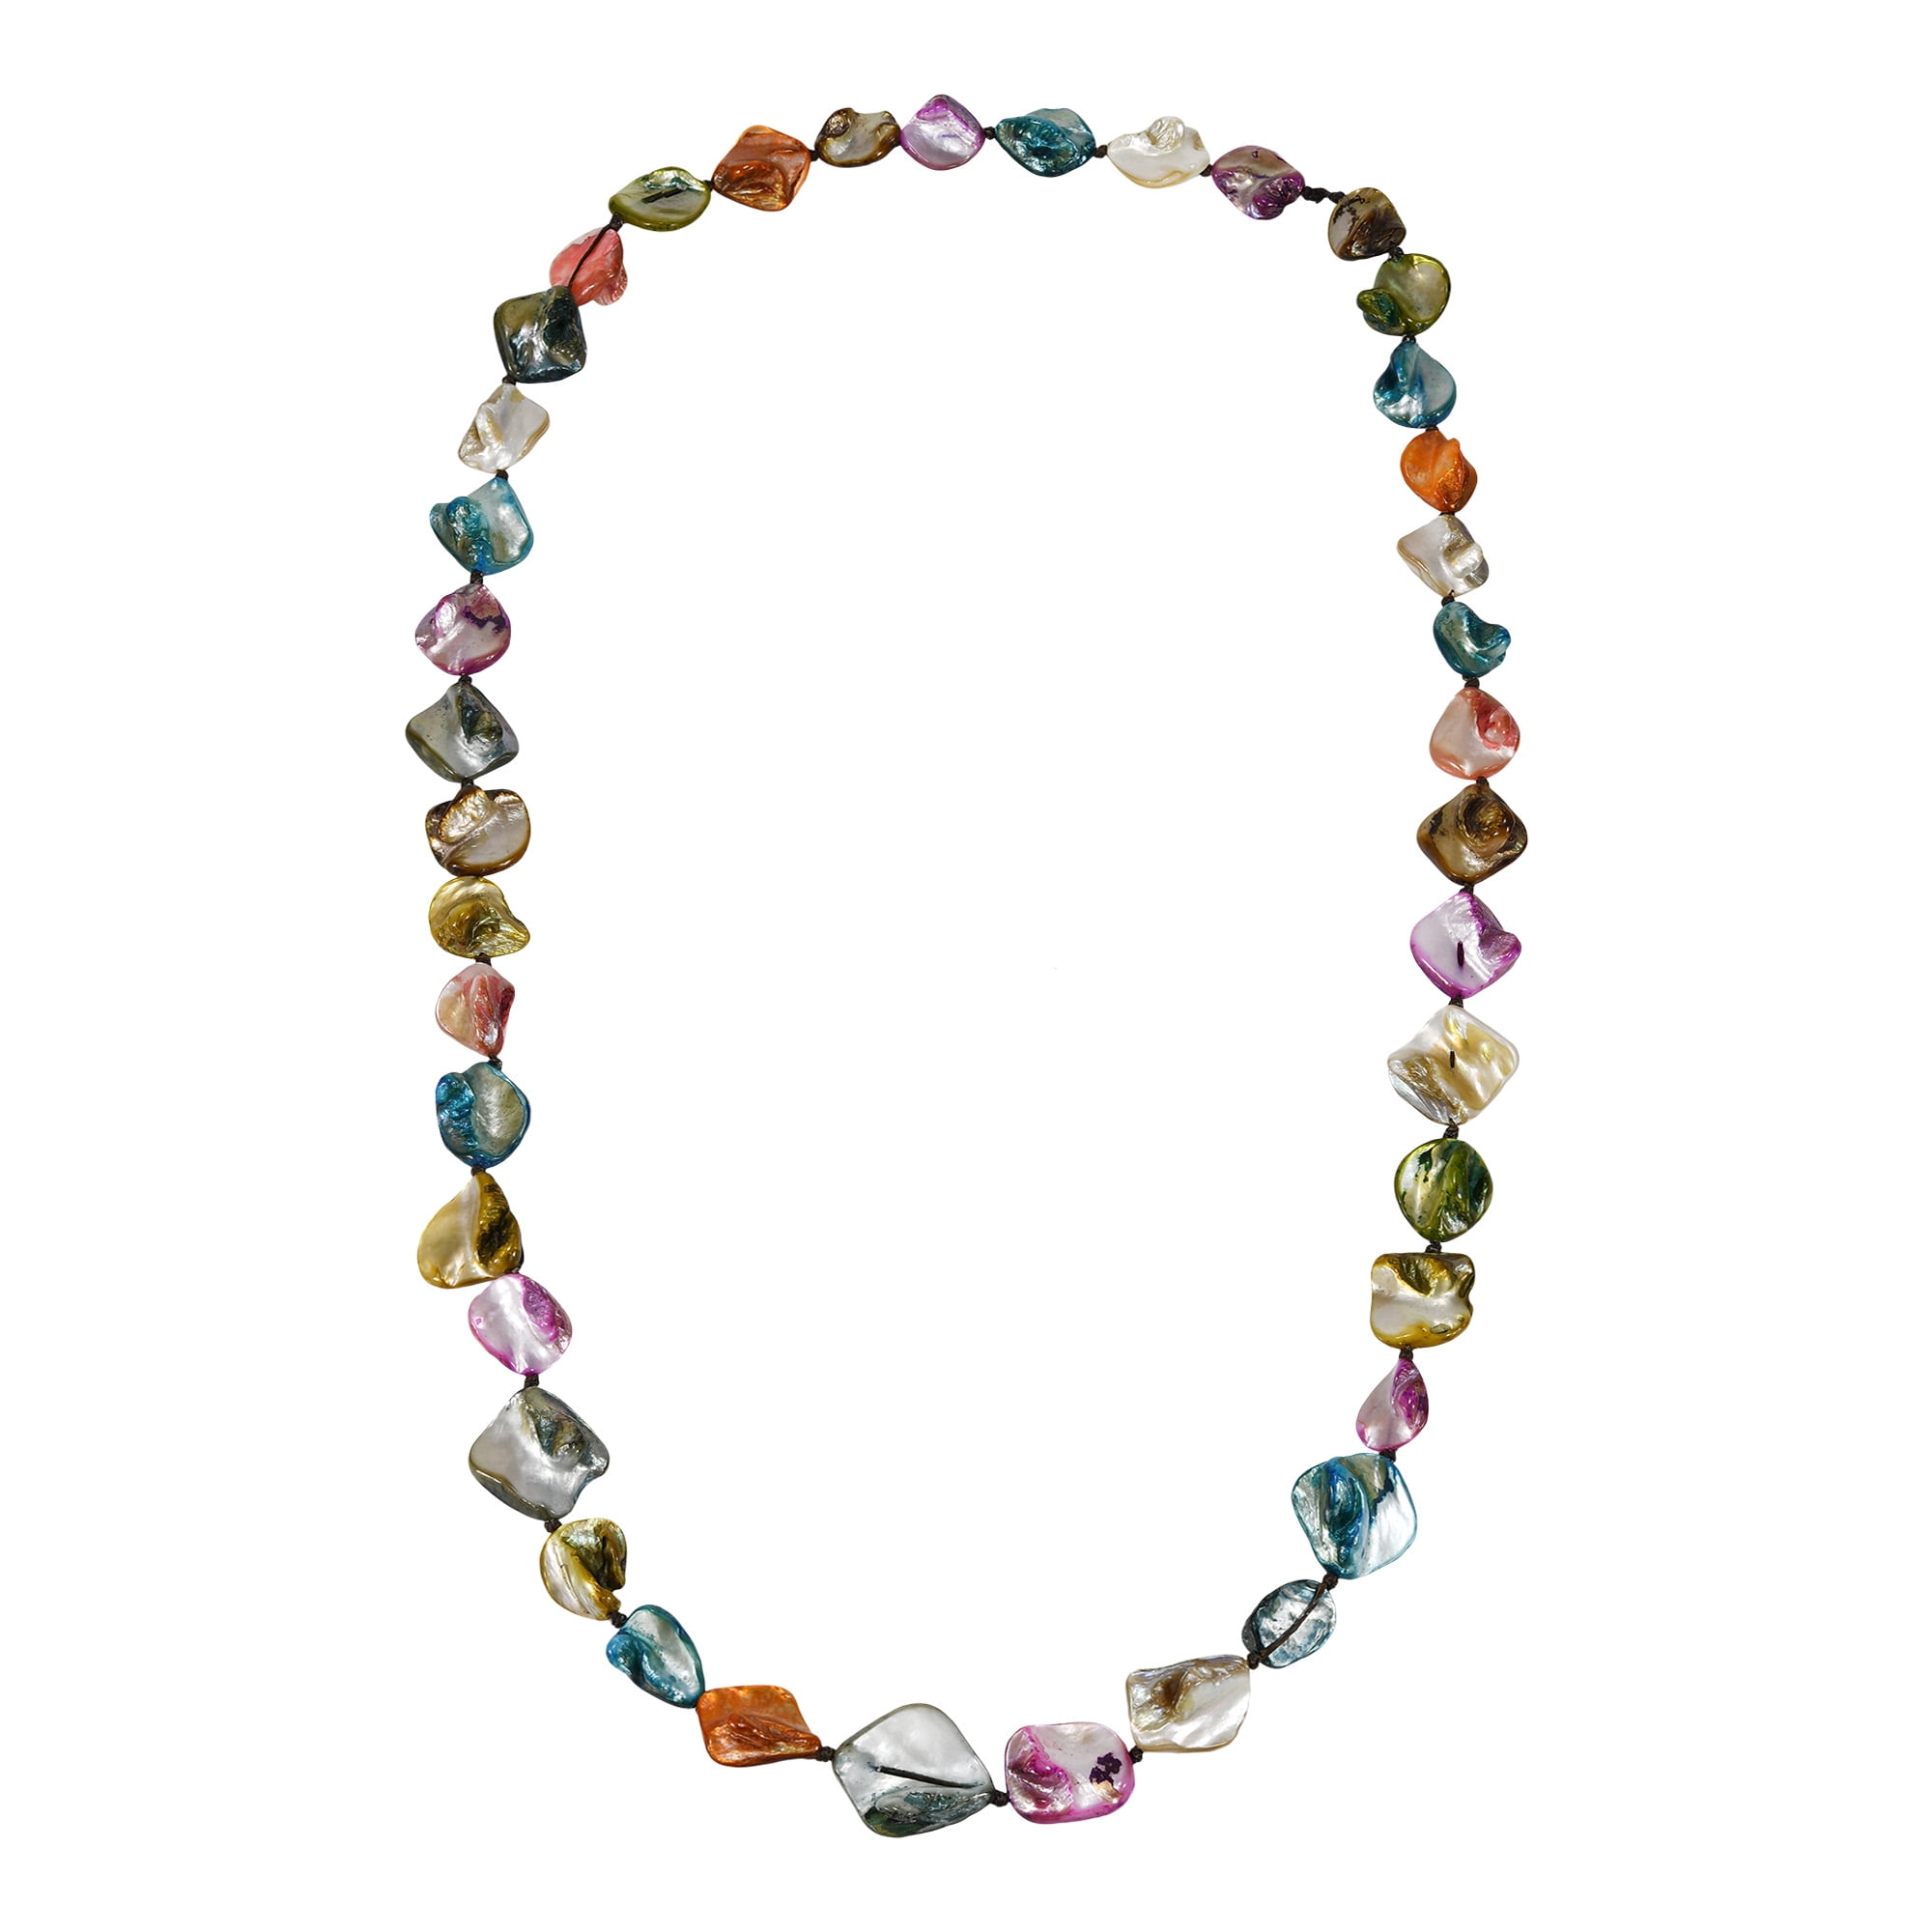 Abalone Shell & Mother Of Pearl Teardrop Pendant Necklace |  WildCanyonJewelry.com